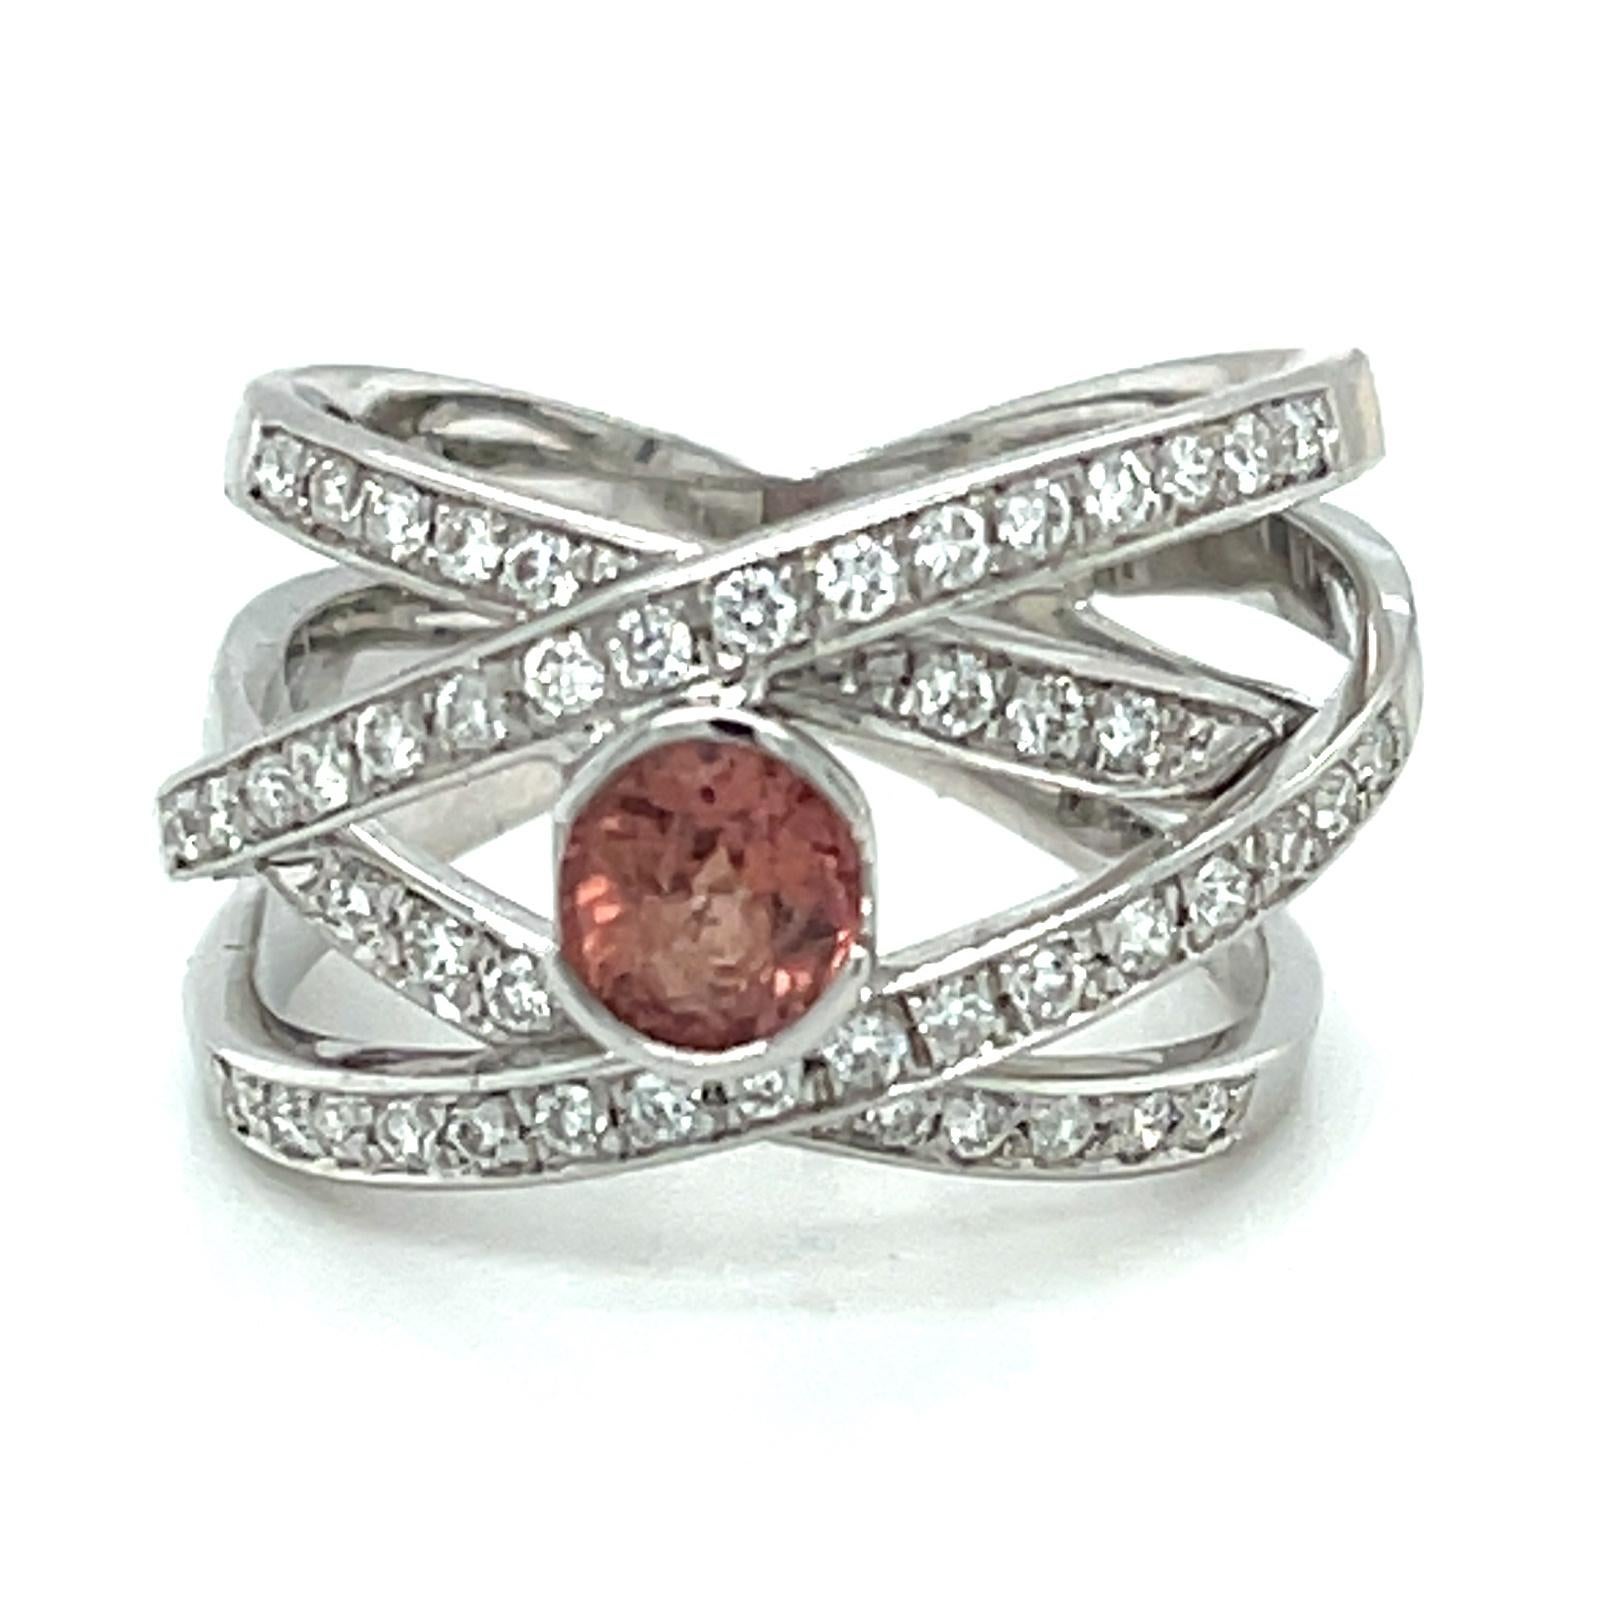 This gorgeous ring features a rare padparadscha sapphire that has been bezel-set in a beautiful 18k white gold band. Highly-prized by gem collectors and jewelers alike, padparadscha sapphires possess a unique blend of pinkish-orange or orangey-pink